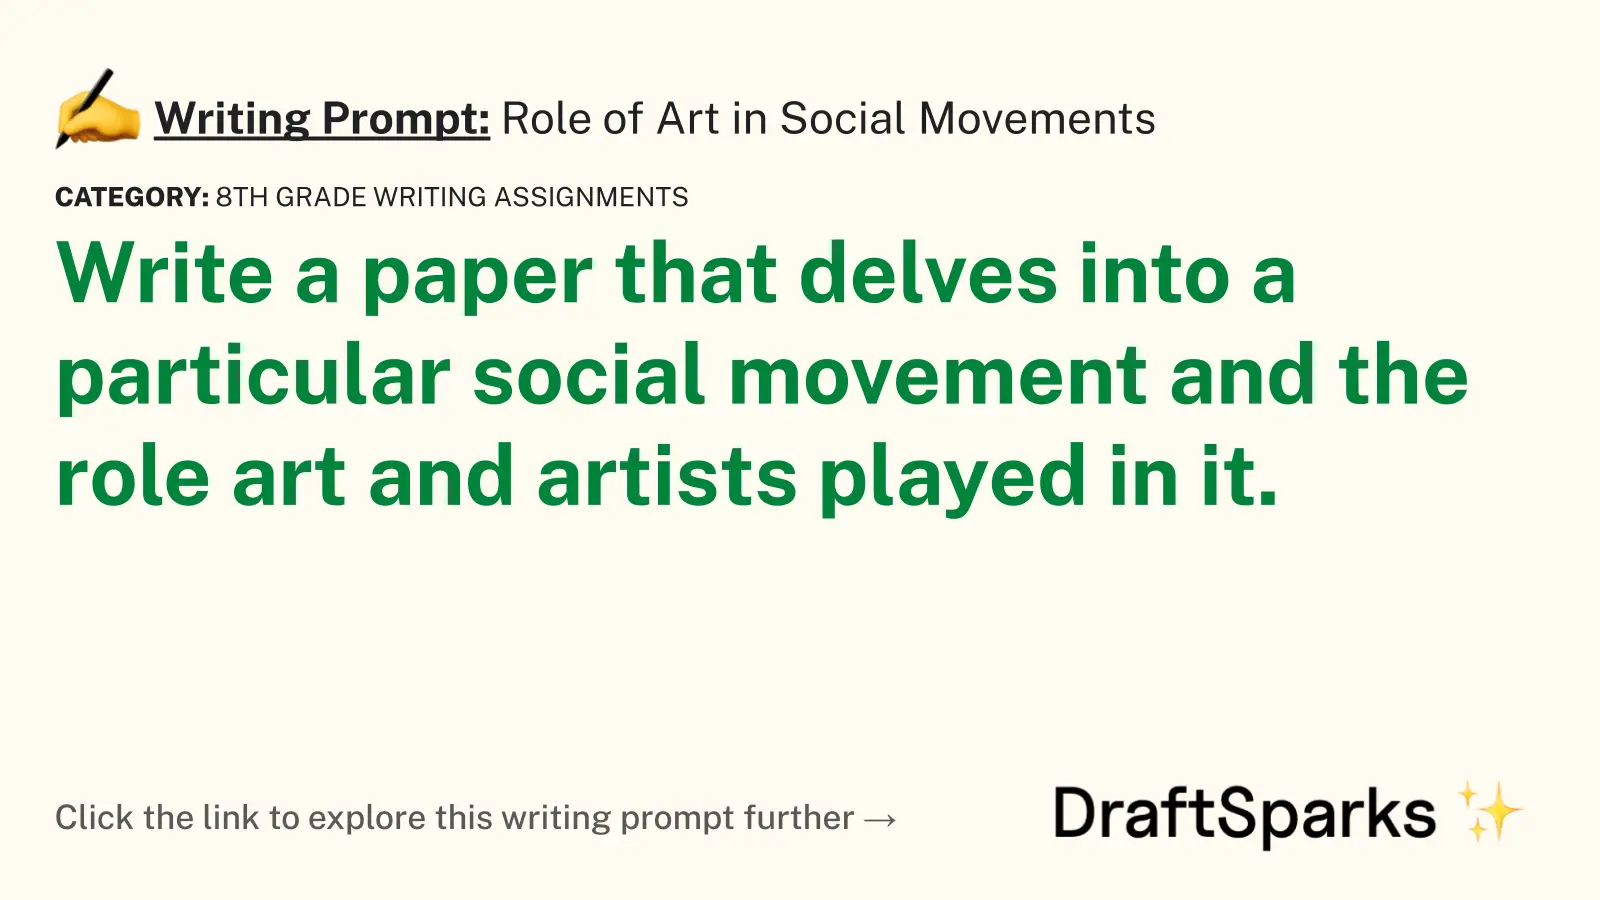 Role of Art in Social Movements